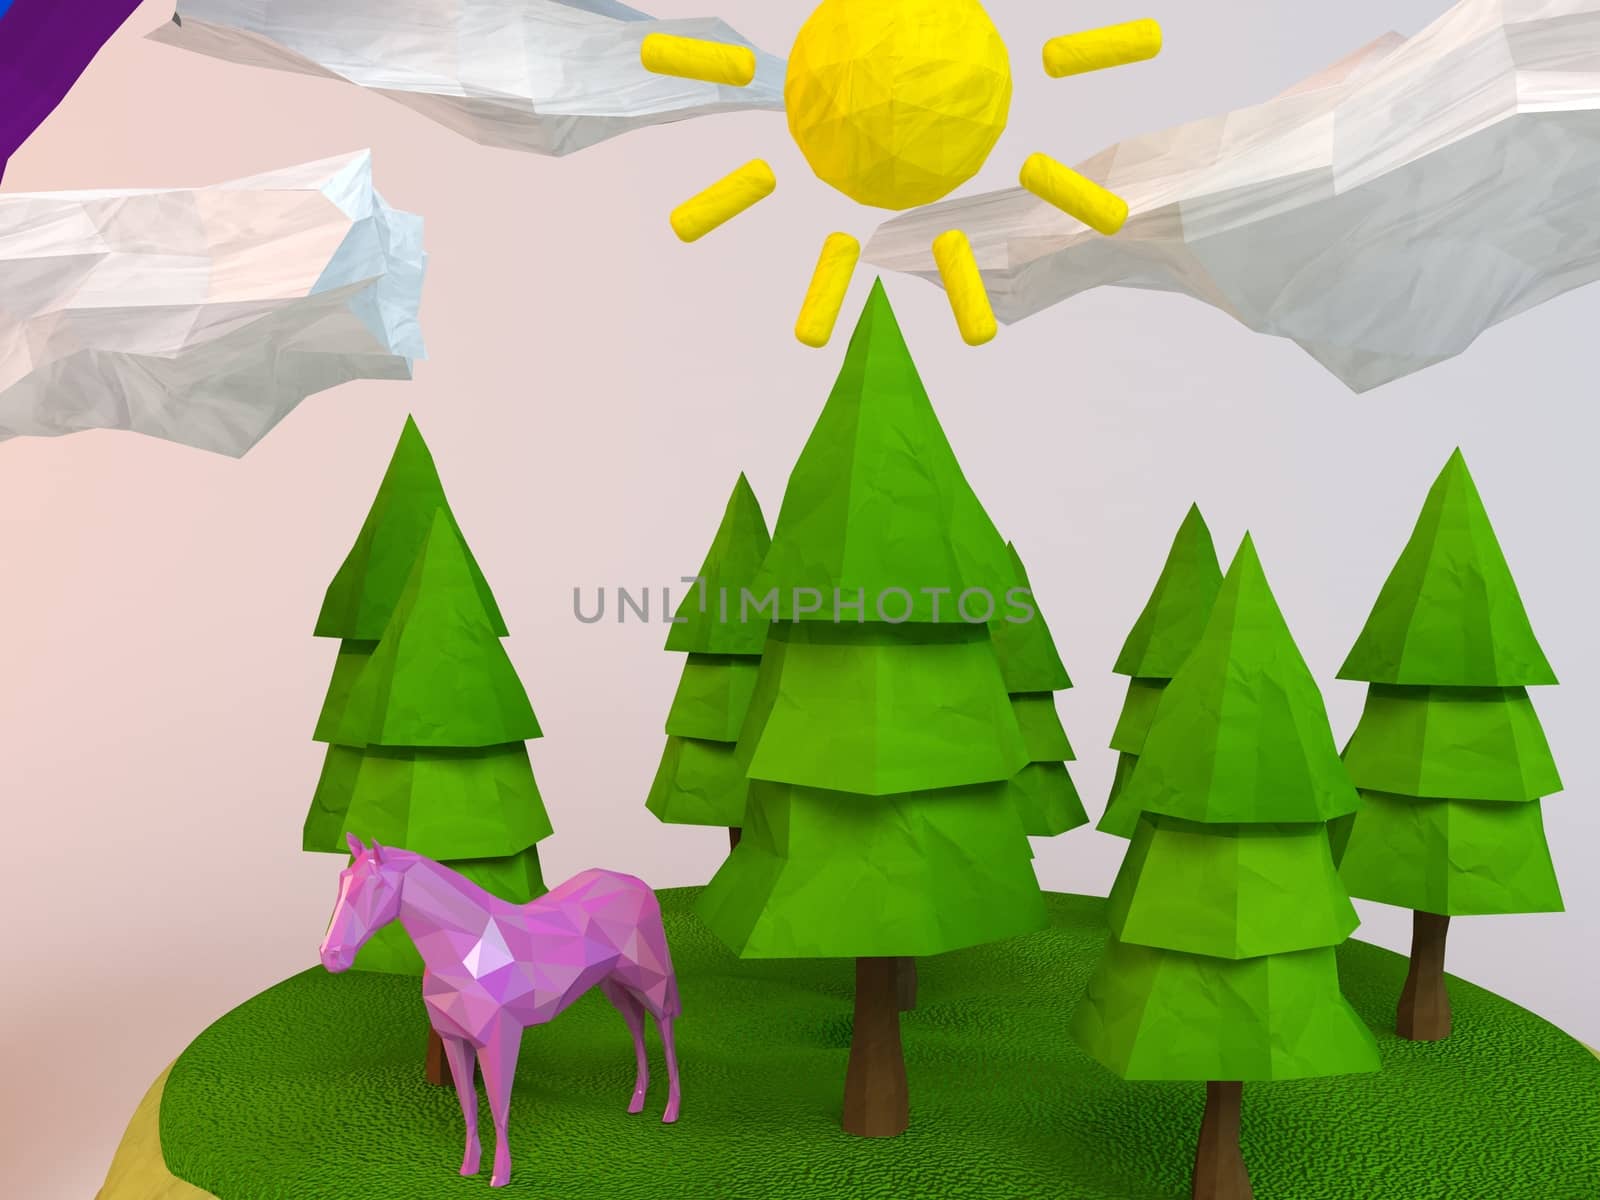 3d horse inside a low-poly green scene by fares139